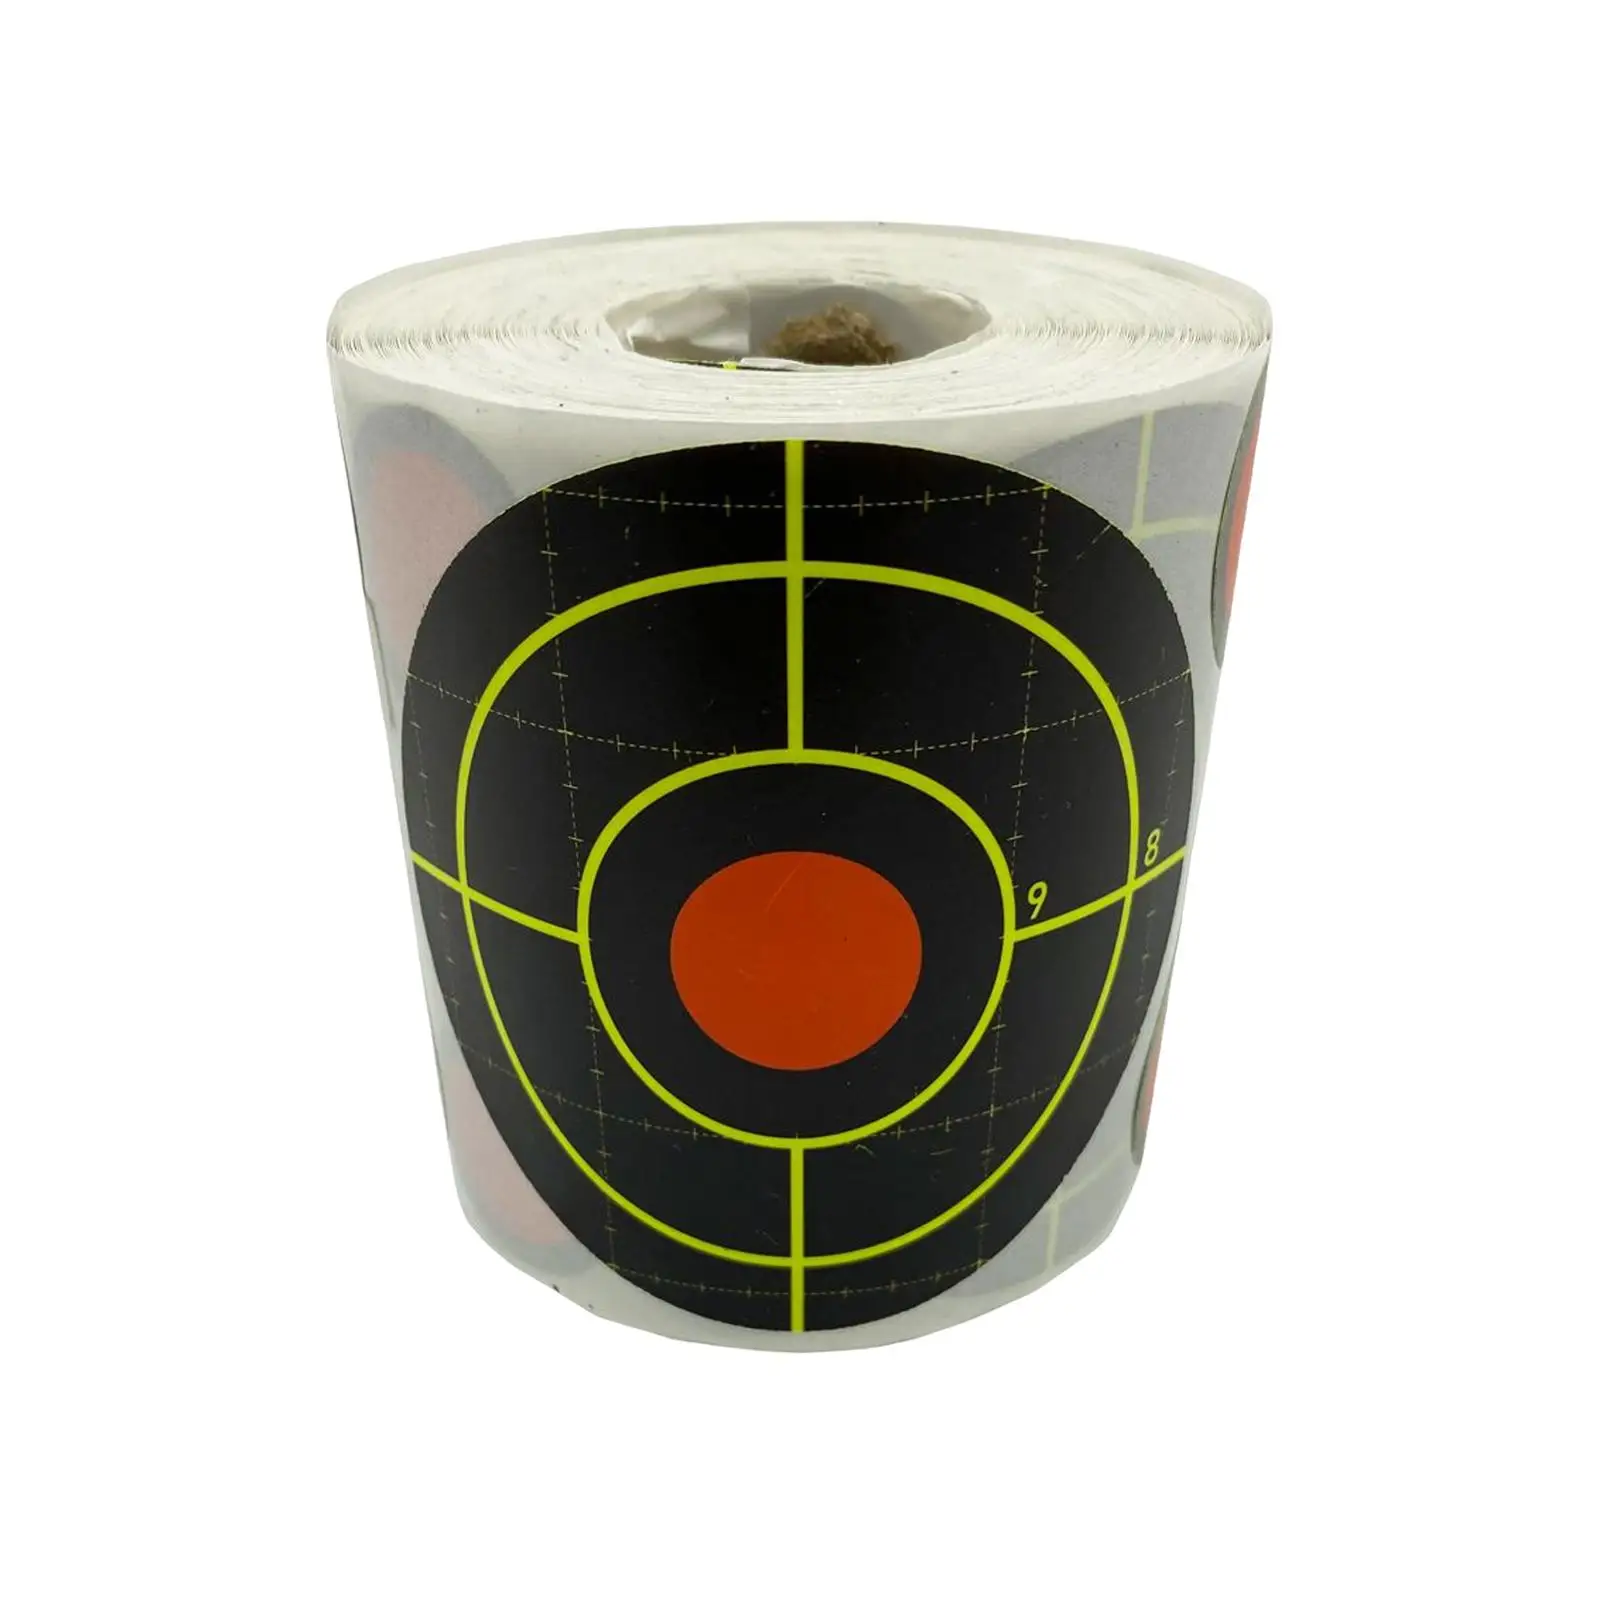 200 Pieces 3`` Splatter Targets for Shooting, Self Adhesive Targets Stickers